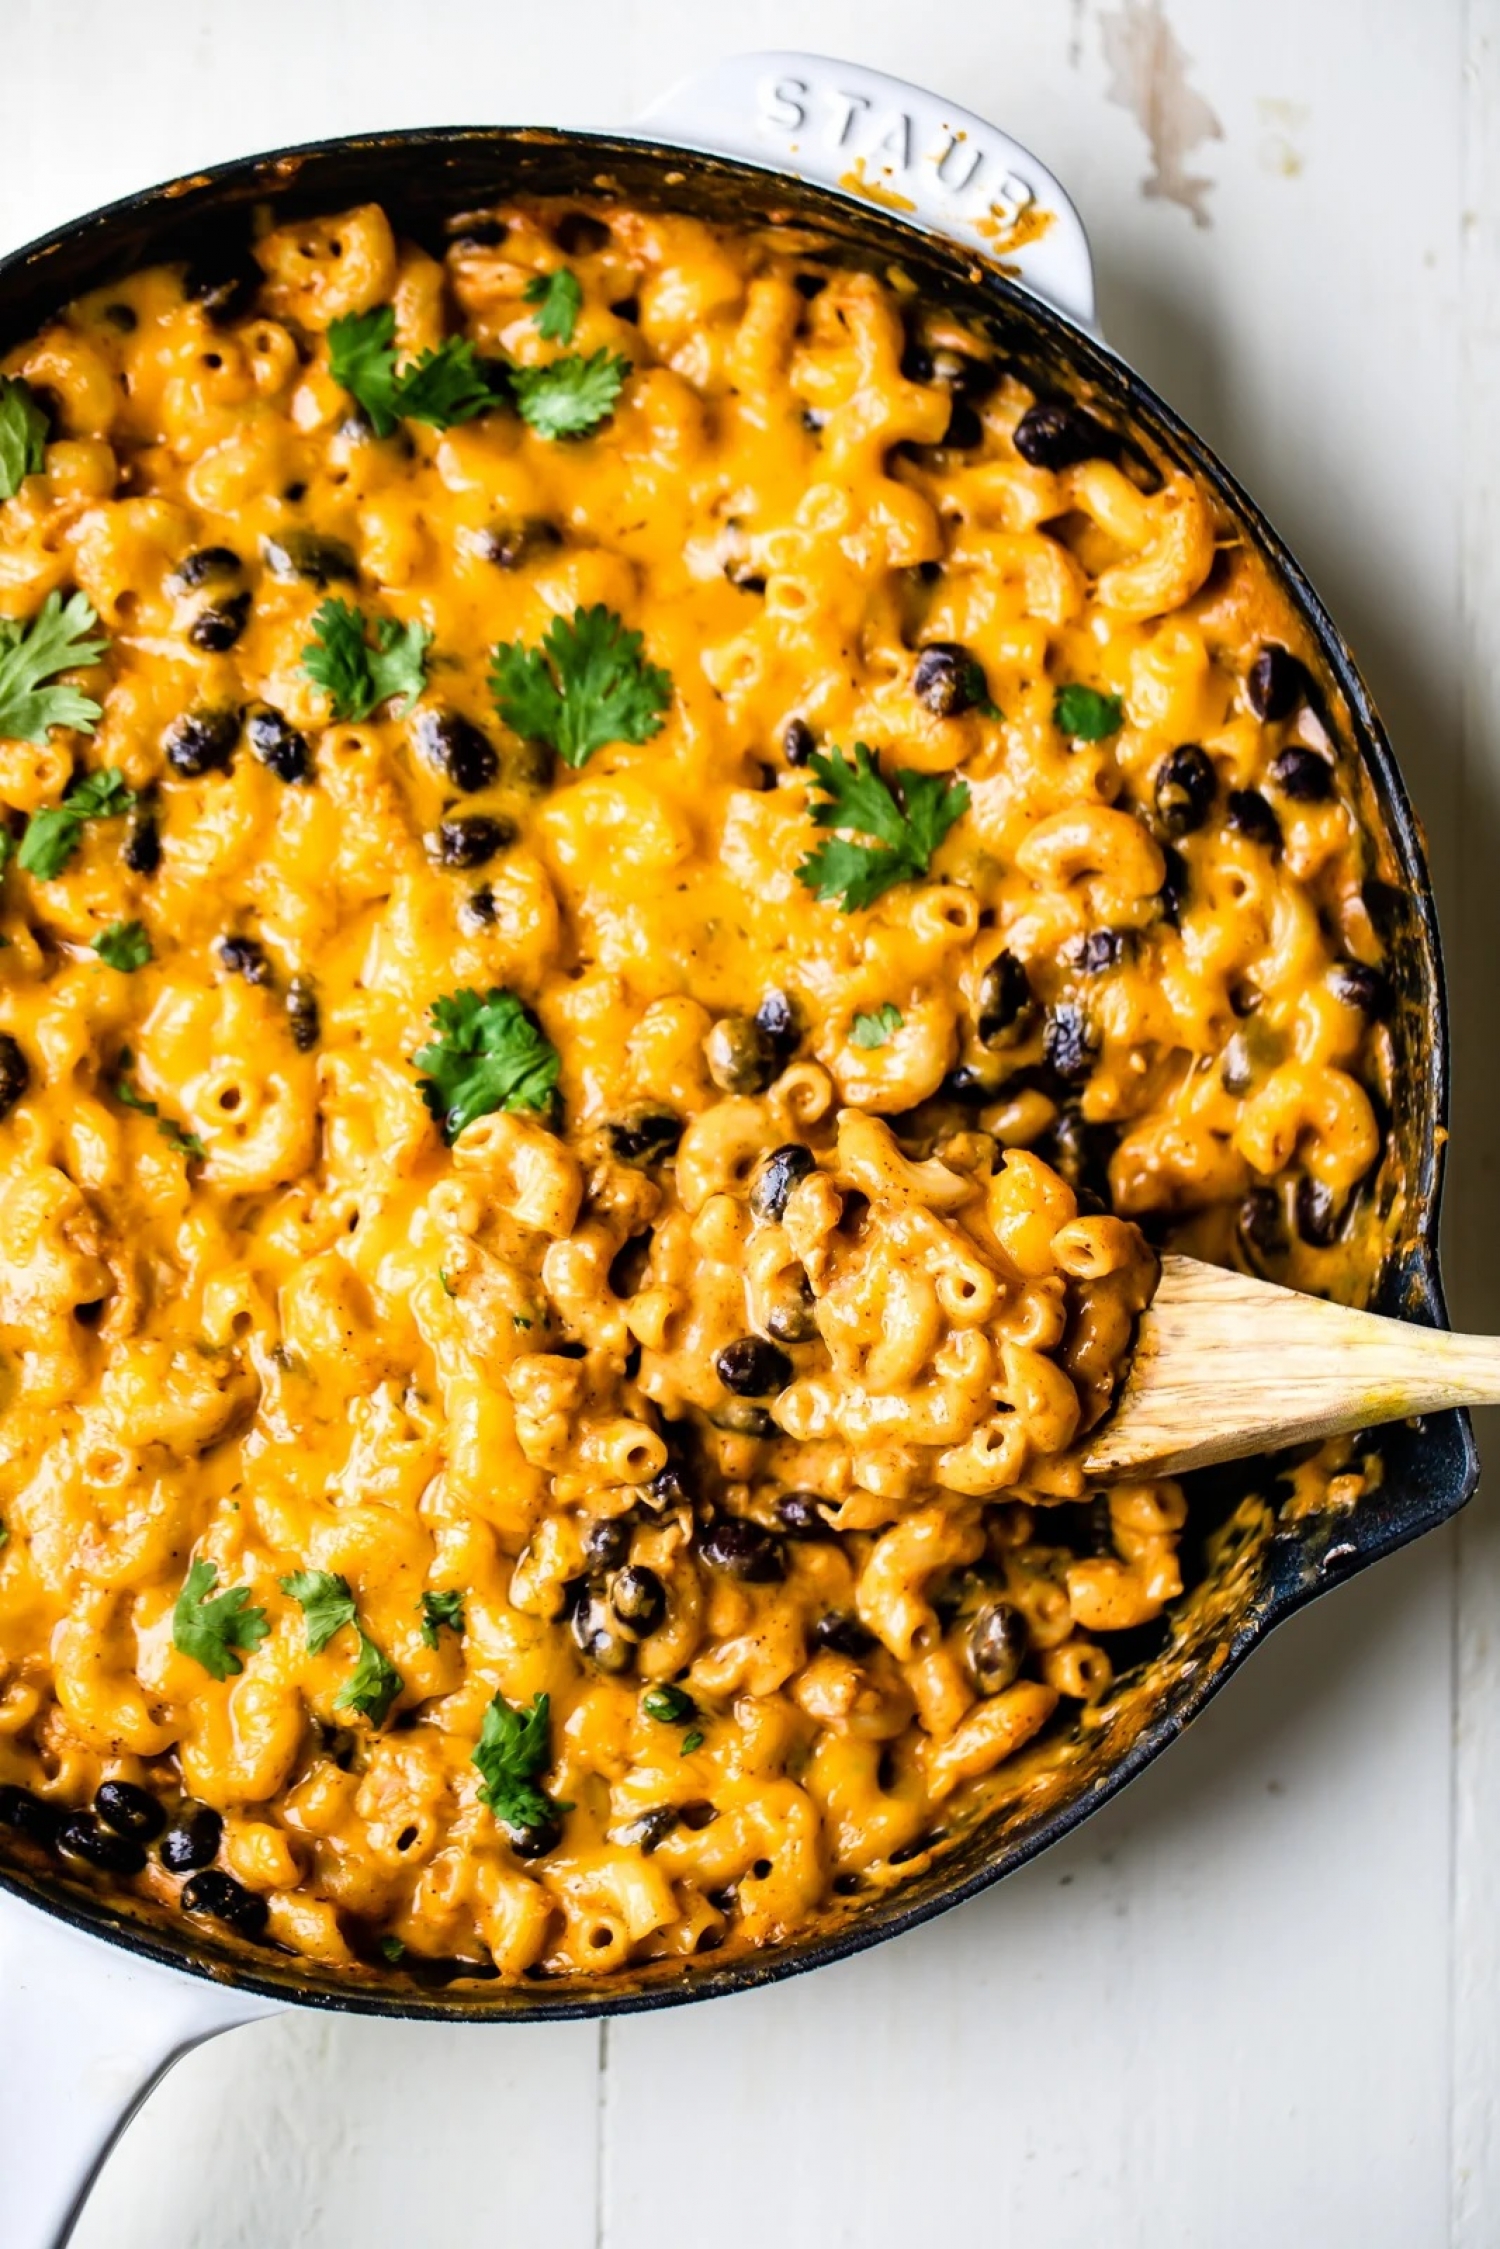 <p>Canned black beans and taco seasoning add a delish Southwestern flair to mac 'n cheese in <a href="https://www.ambitiouskitchen.com/stove-top-southwest-tuna-mac-and-cheese/" rel="noopener">this satisfying recipe</a>. Throw in some canned tuna, and you've got a low-budget, high-protein meal to please the whole family.</p>